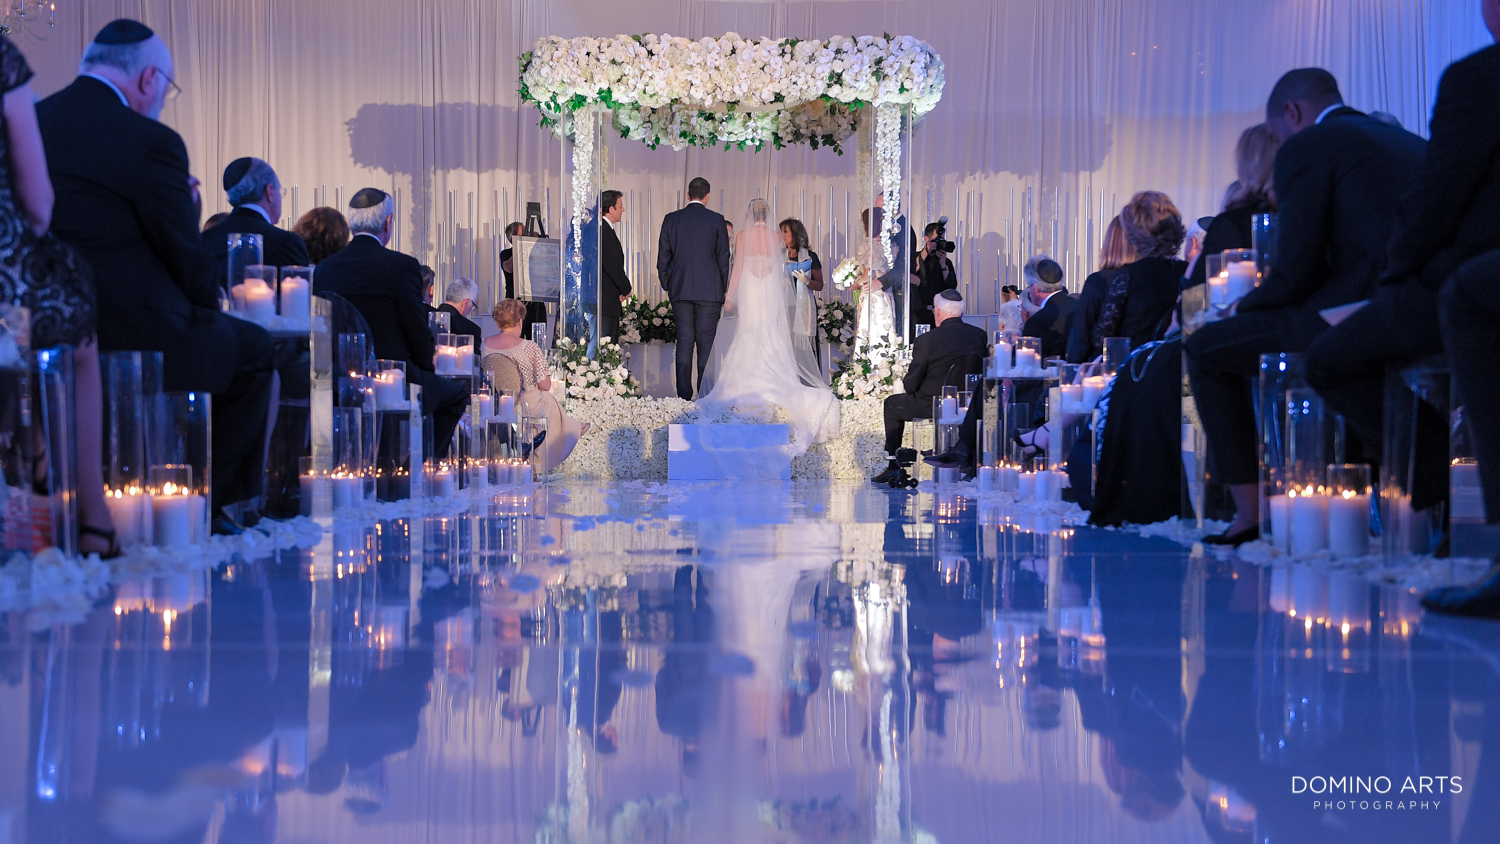 Jewish wedding ceremony pictures at fontainebleau miami